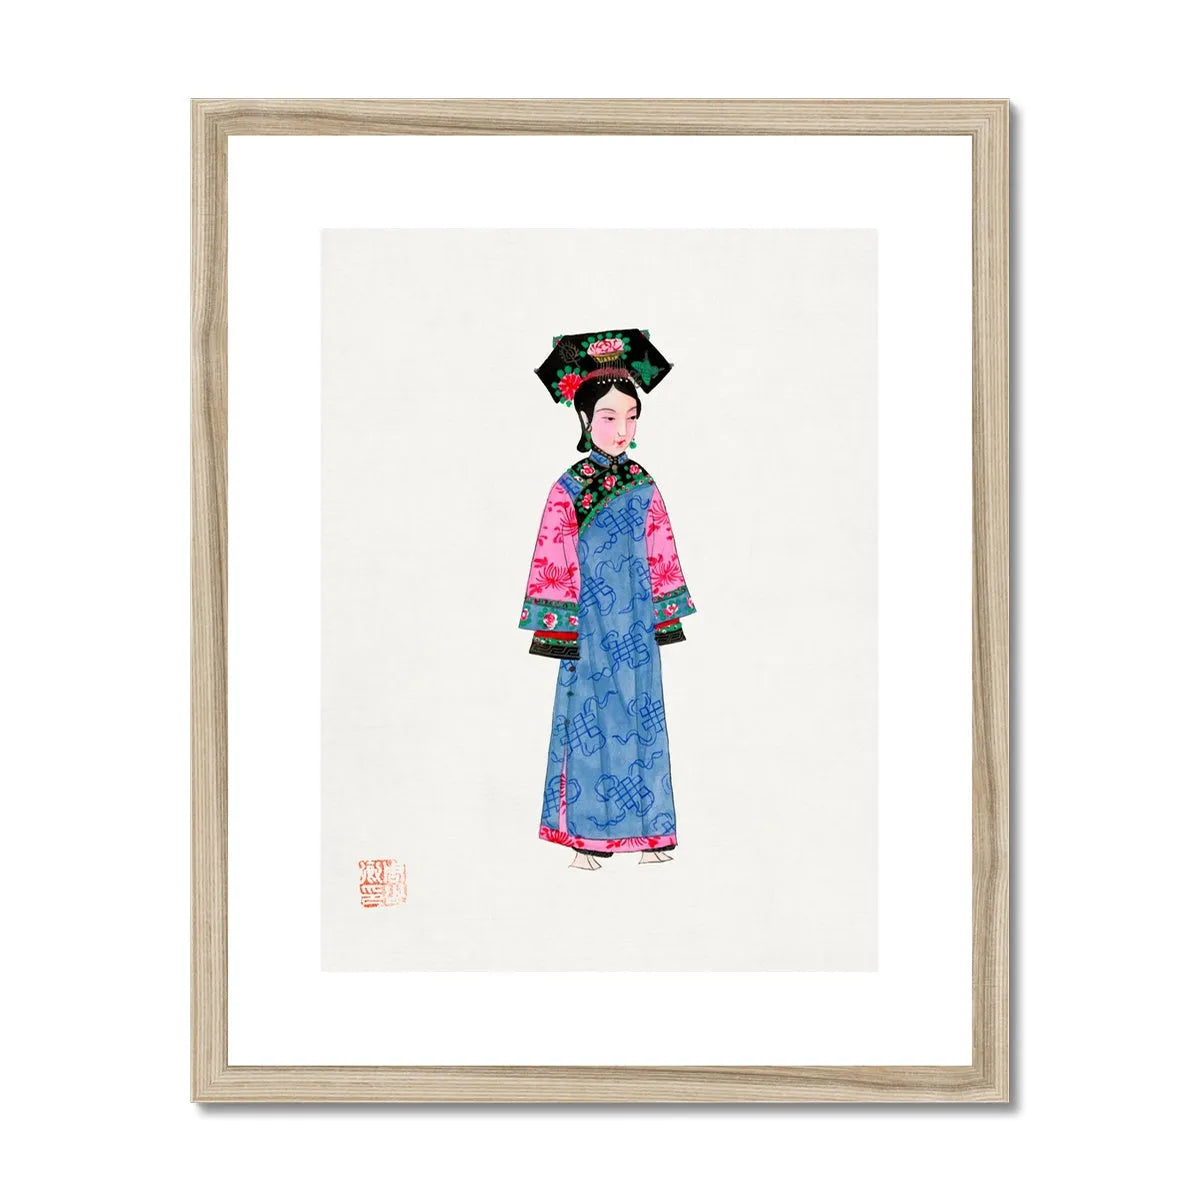 Chinese Noblewoman Too Framed & Mounted Print - 16’x20’ / Natural Frame - Posters Prints & Visual Artwork